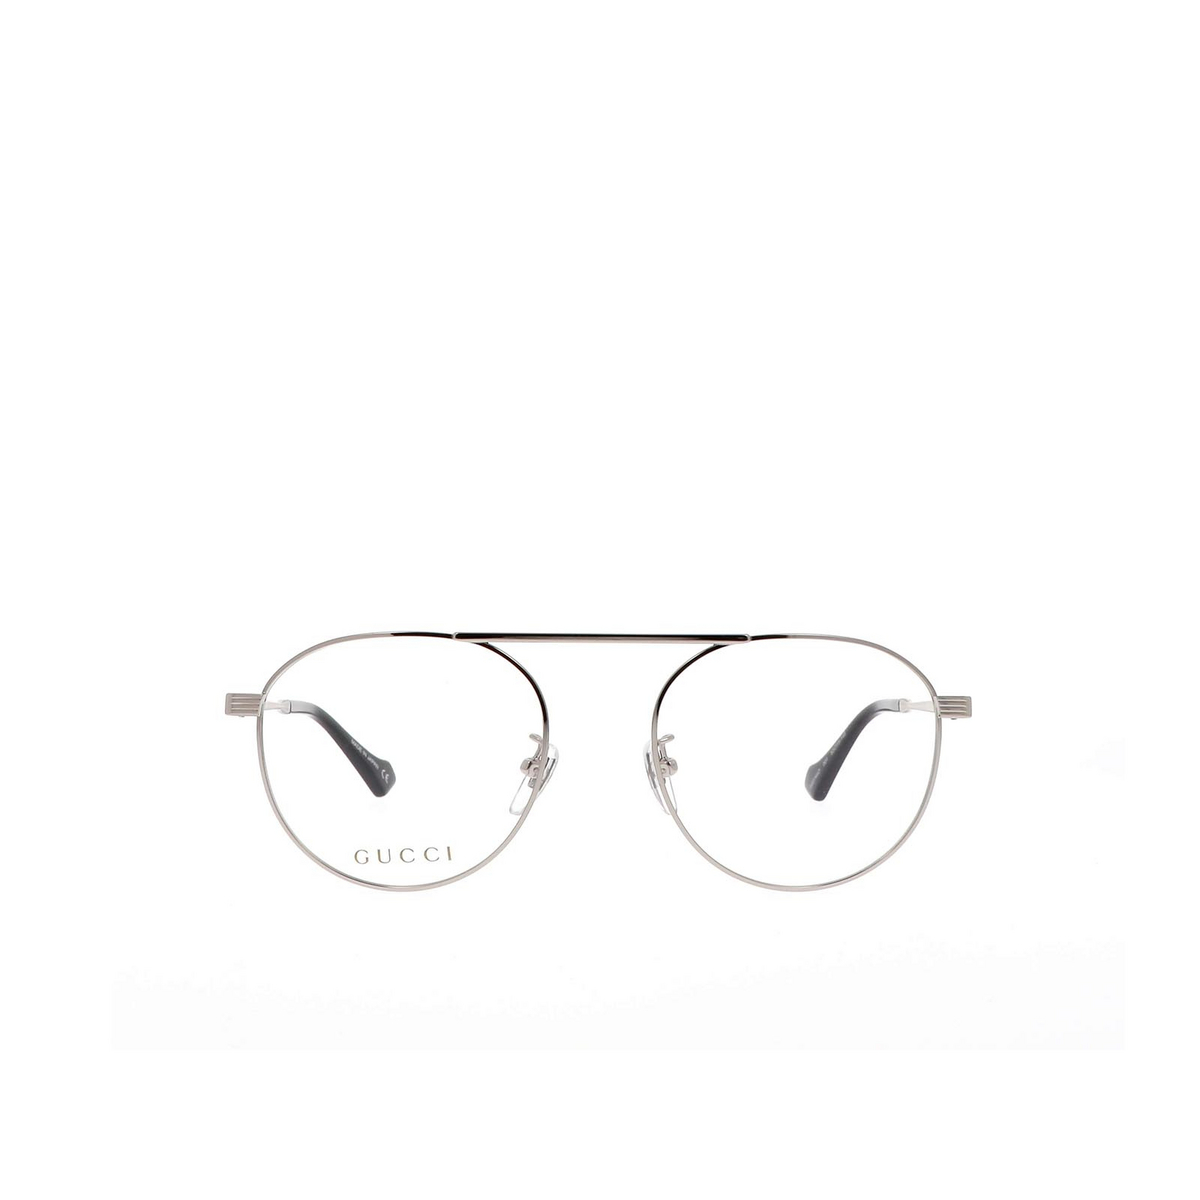 Gucci® Aviator Eyeglasses: GG0744O color Silver 001 - front view.